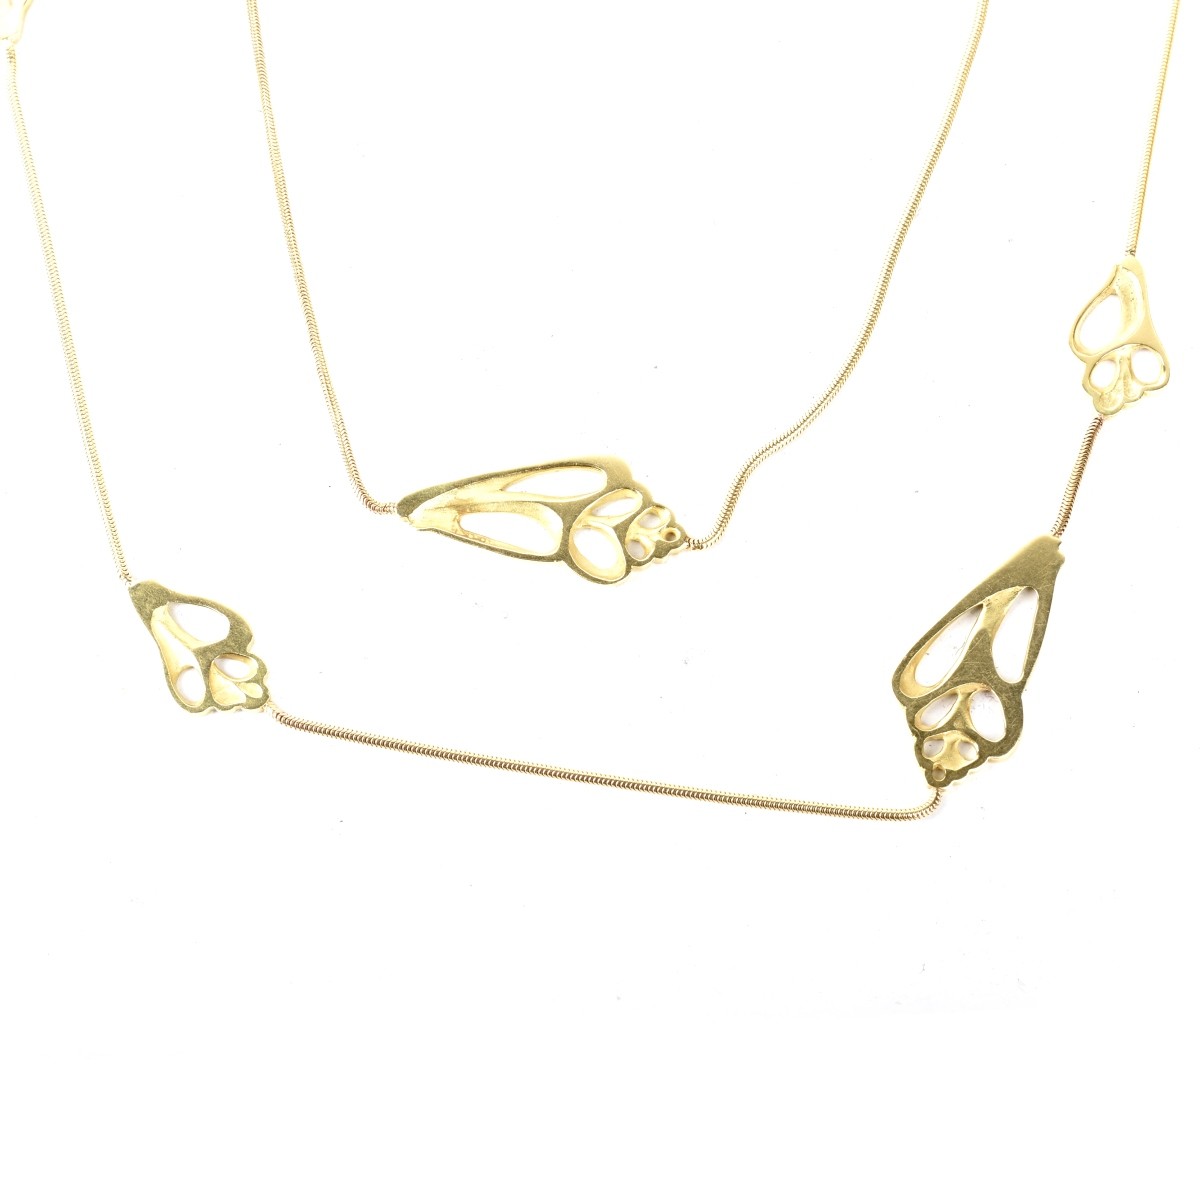 A. Cummings for Tiffany & Co 18K Necklace